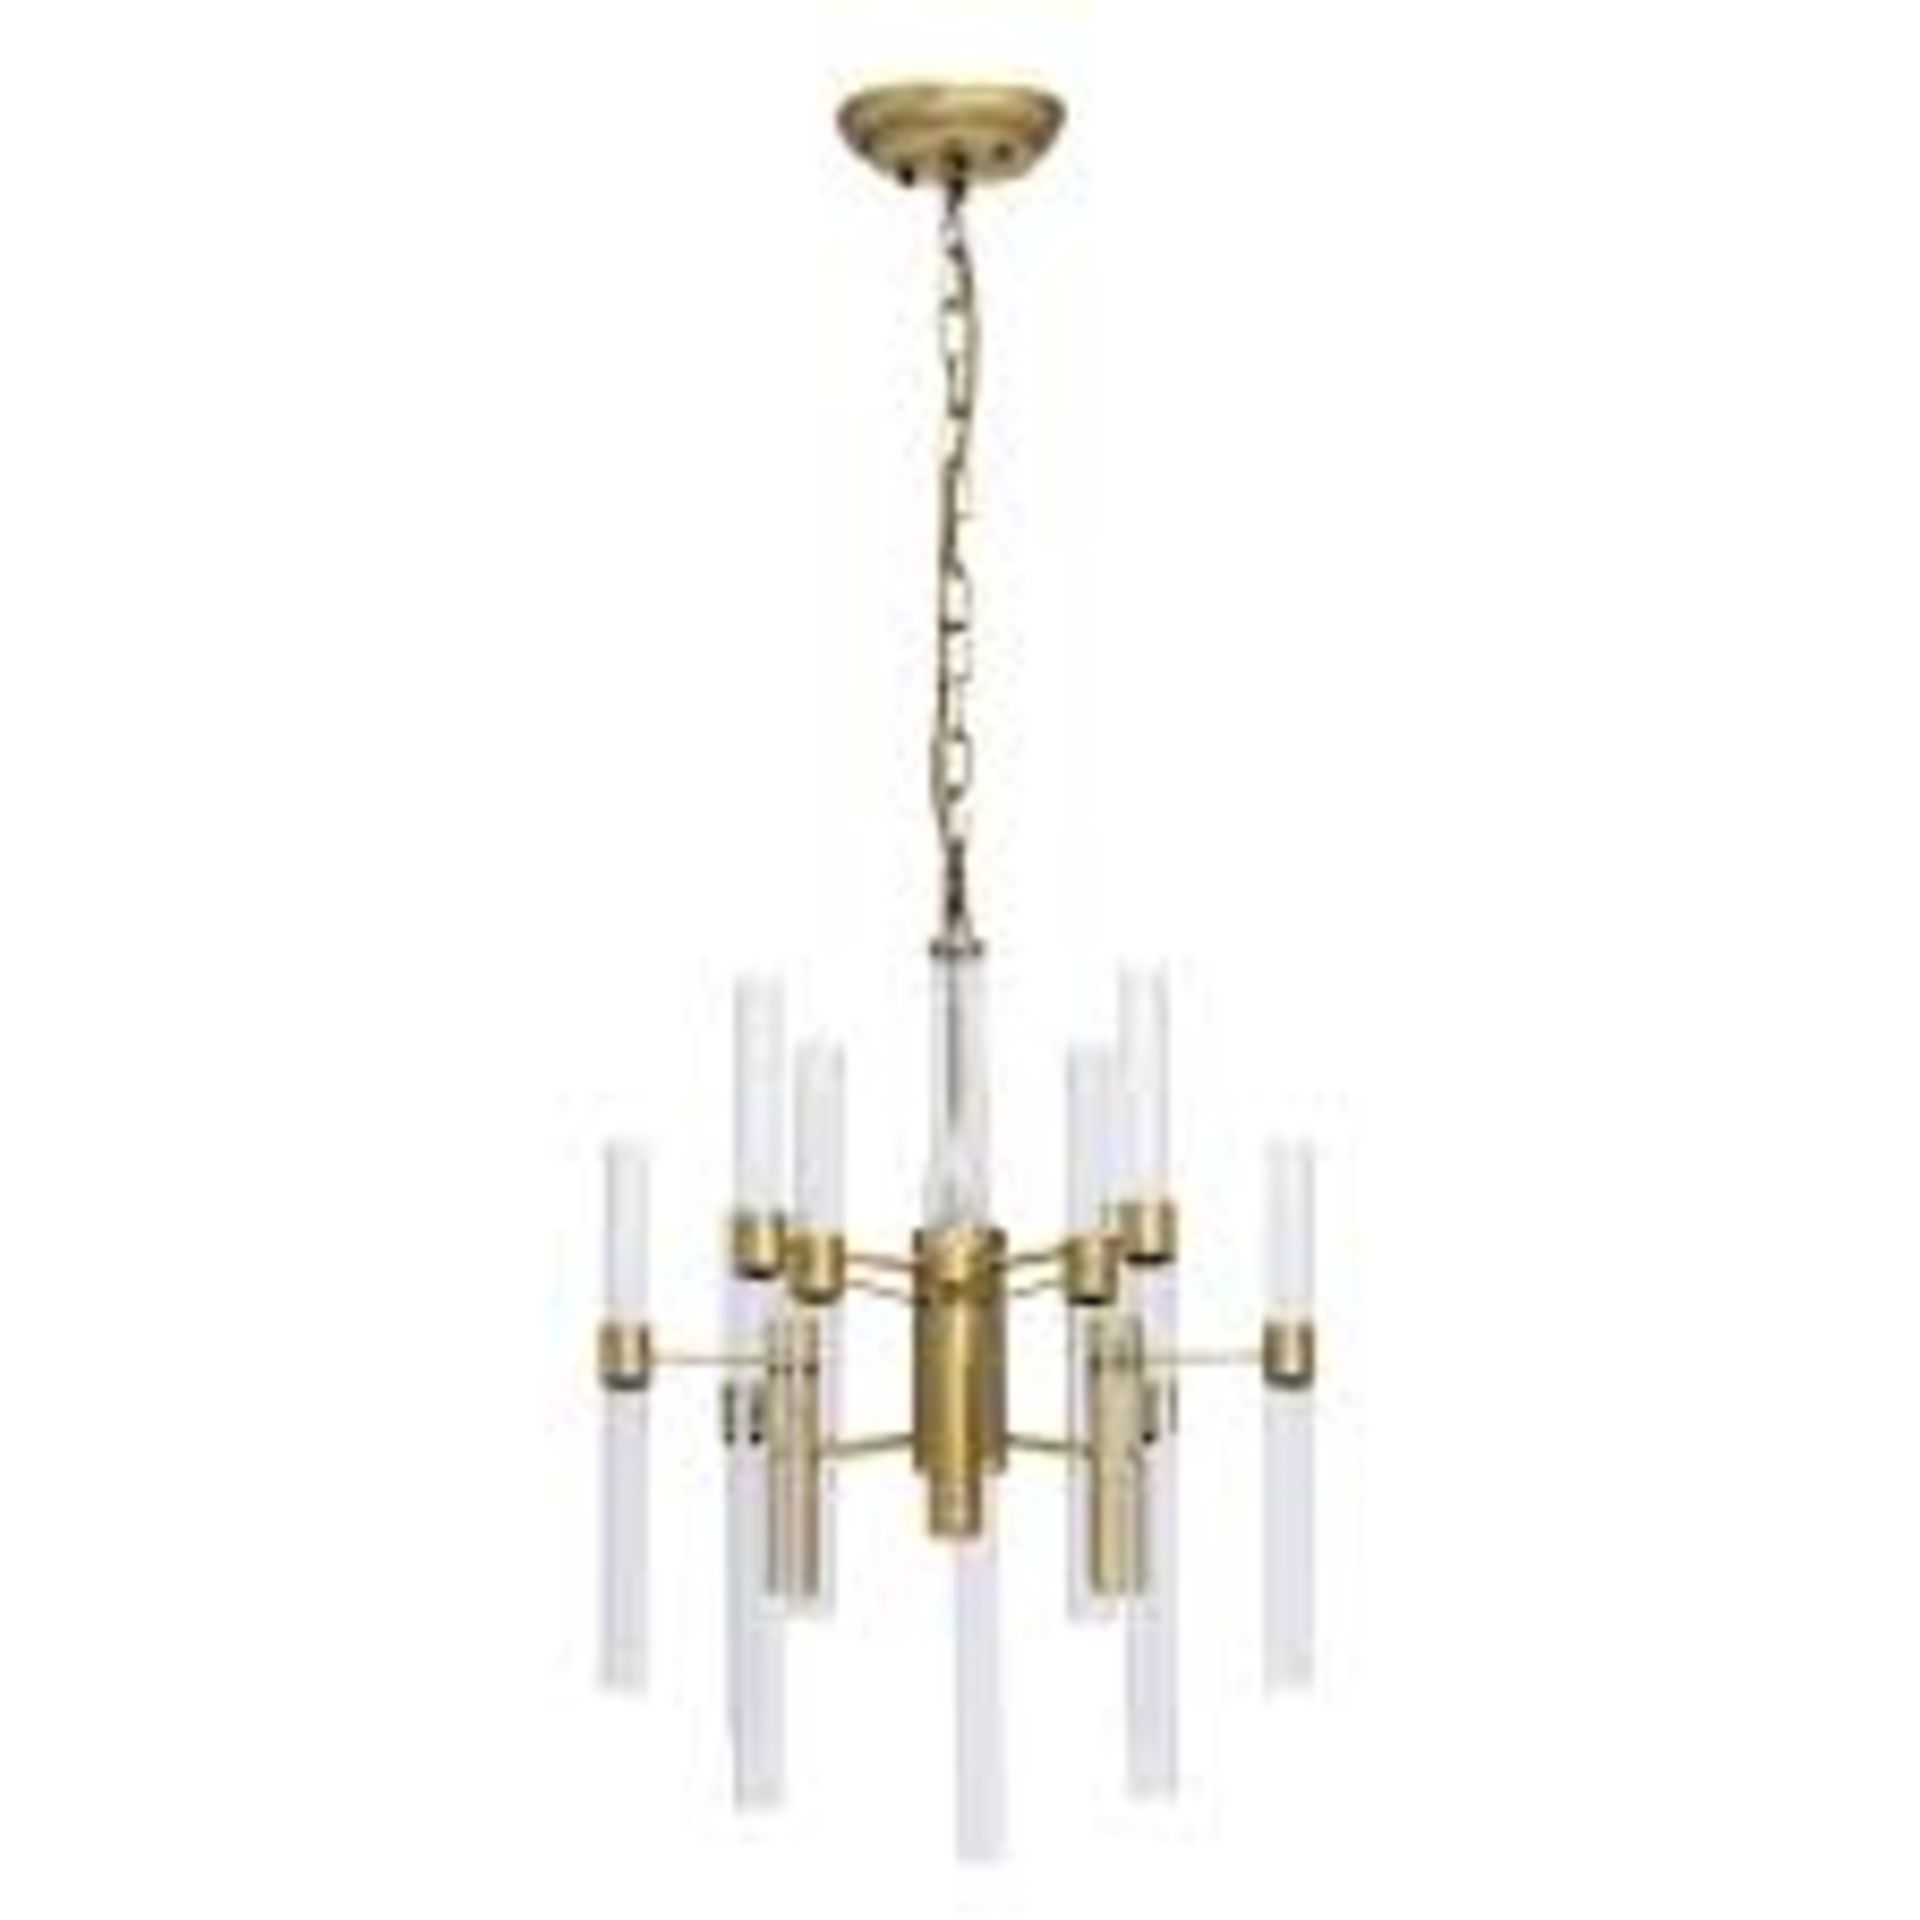 Boxed Willa Arlo Designer Ceiling Light RRP £200 (16228) (Pictures Are For Illustration Purposes) (